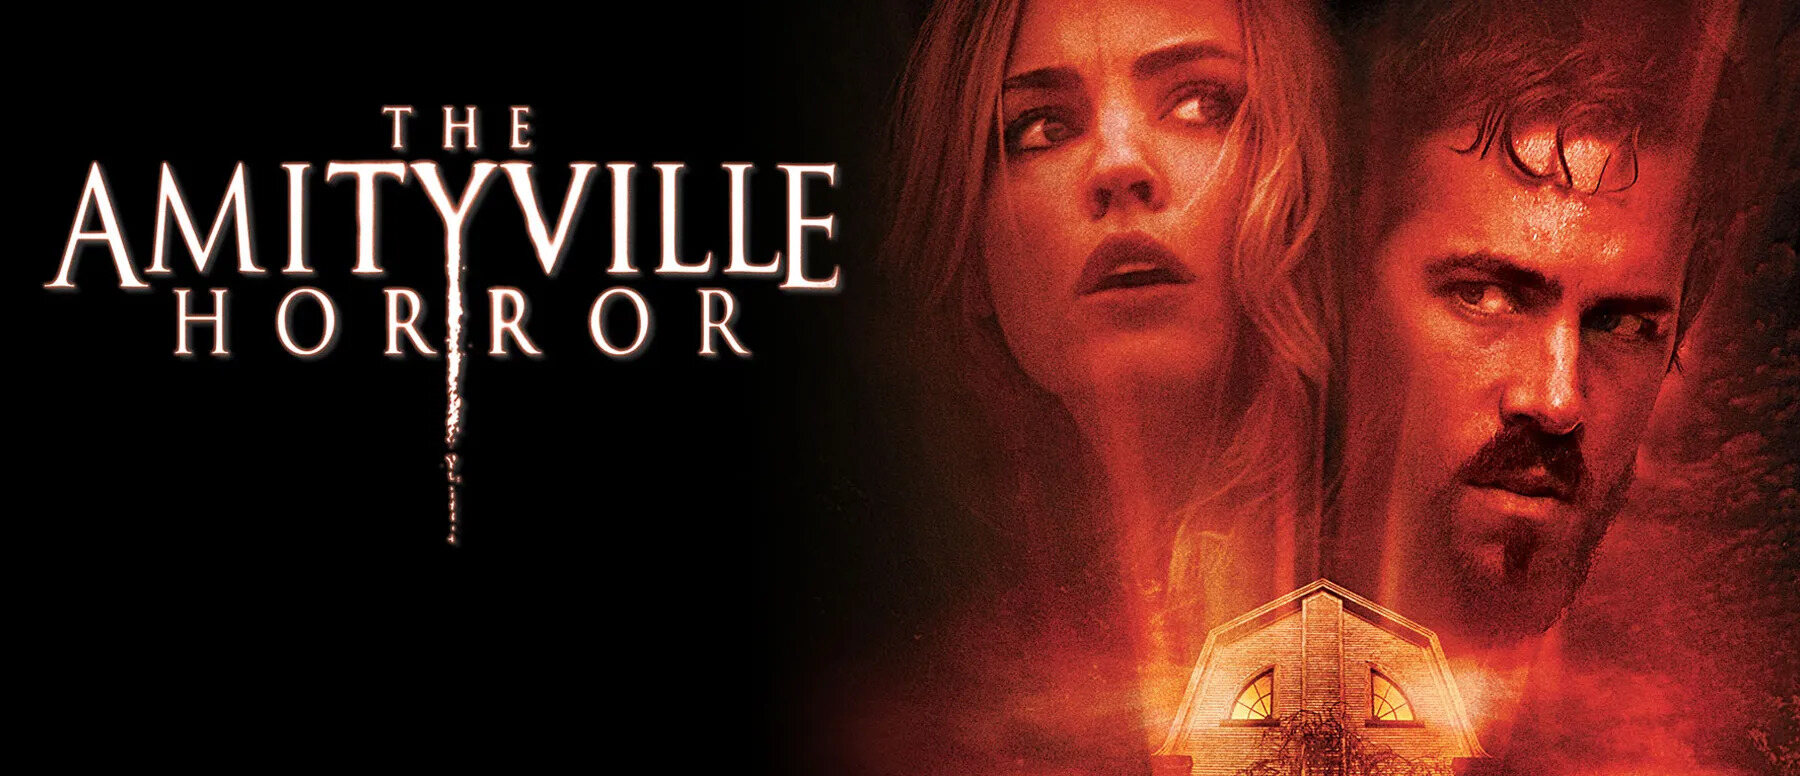 41-facts-about-the-movie-the-amityville-horror